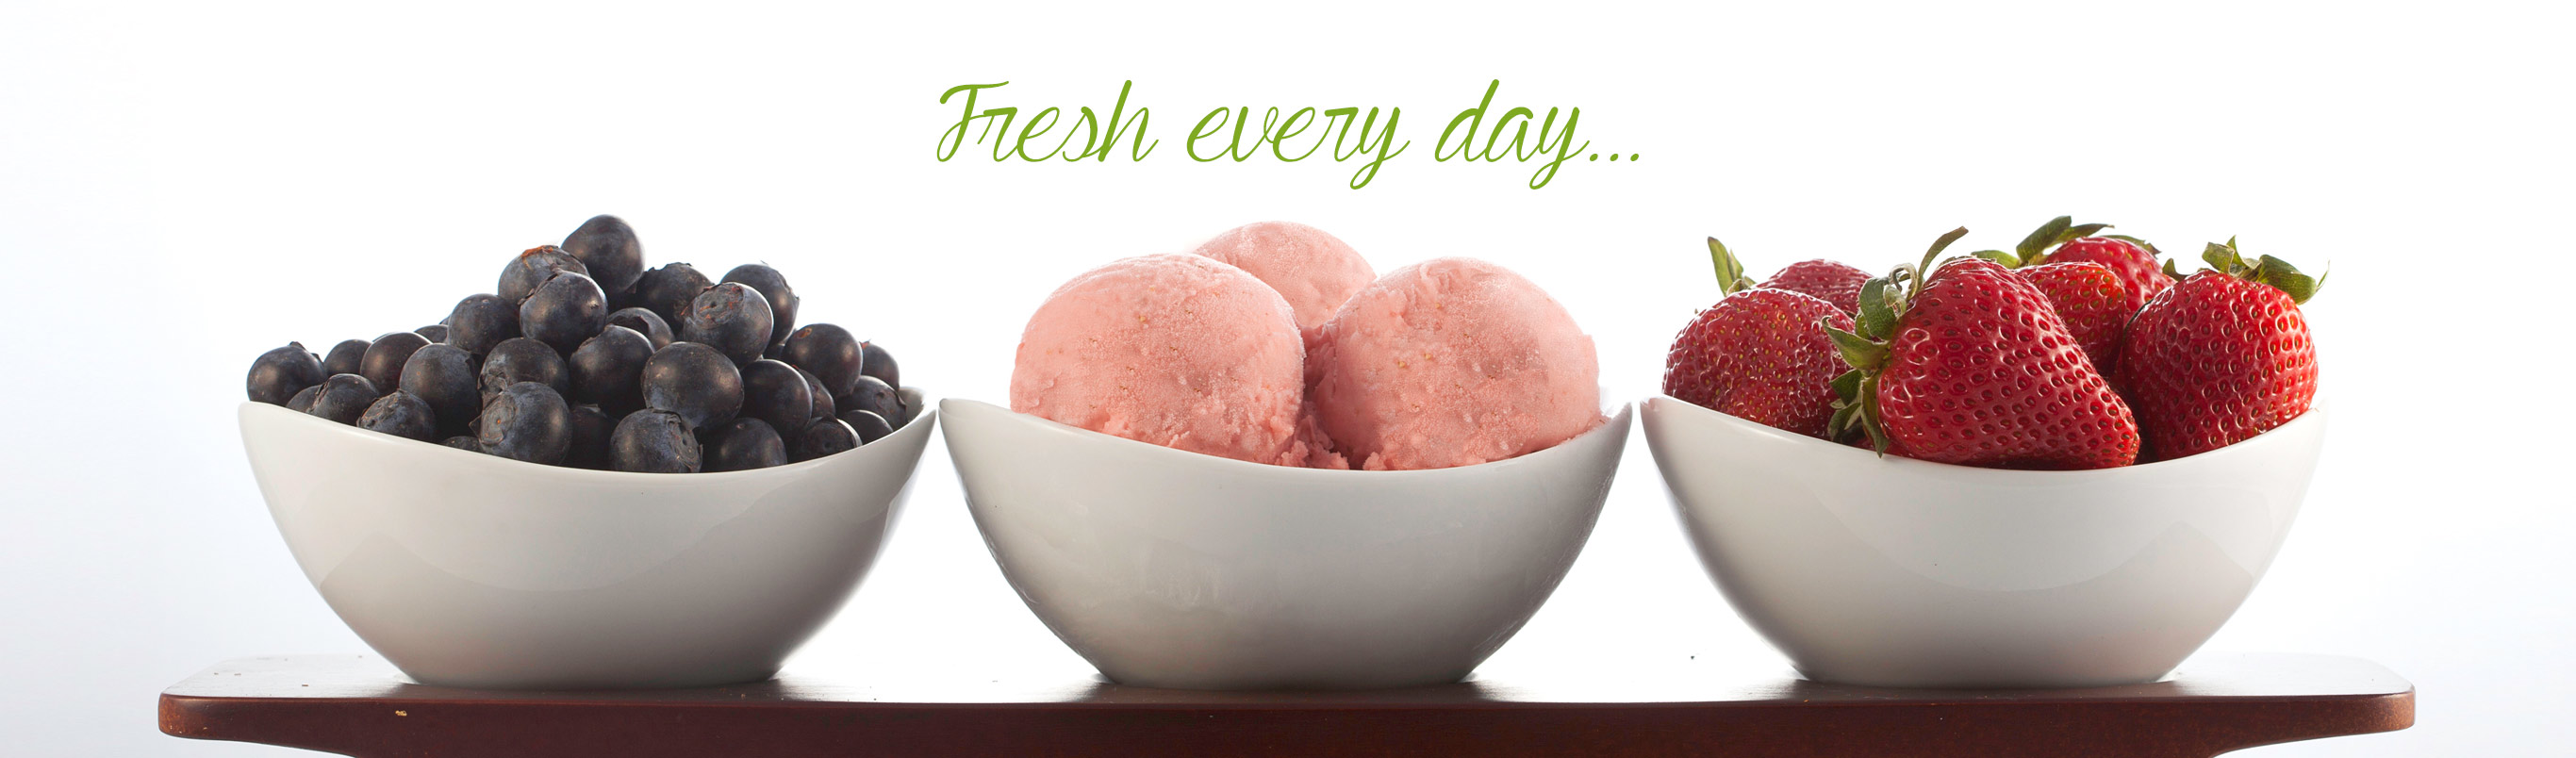 bowls of fruit and gelato with text: Fresh every day